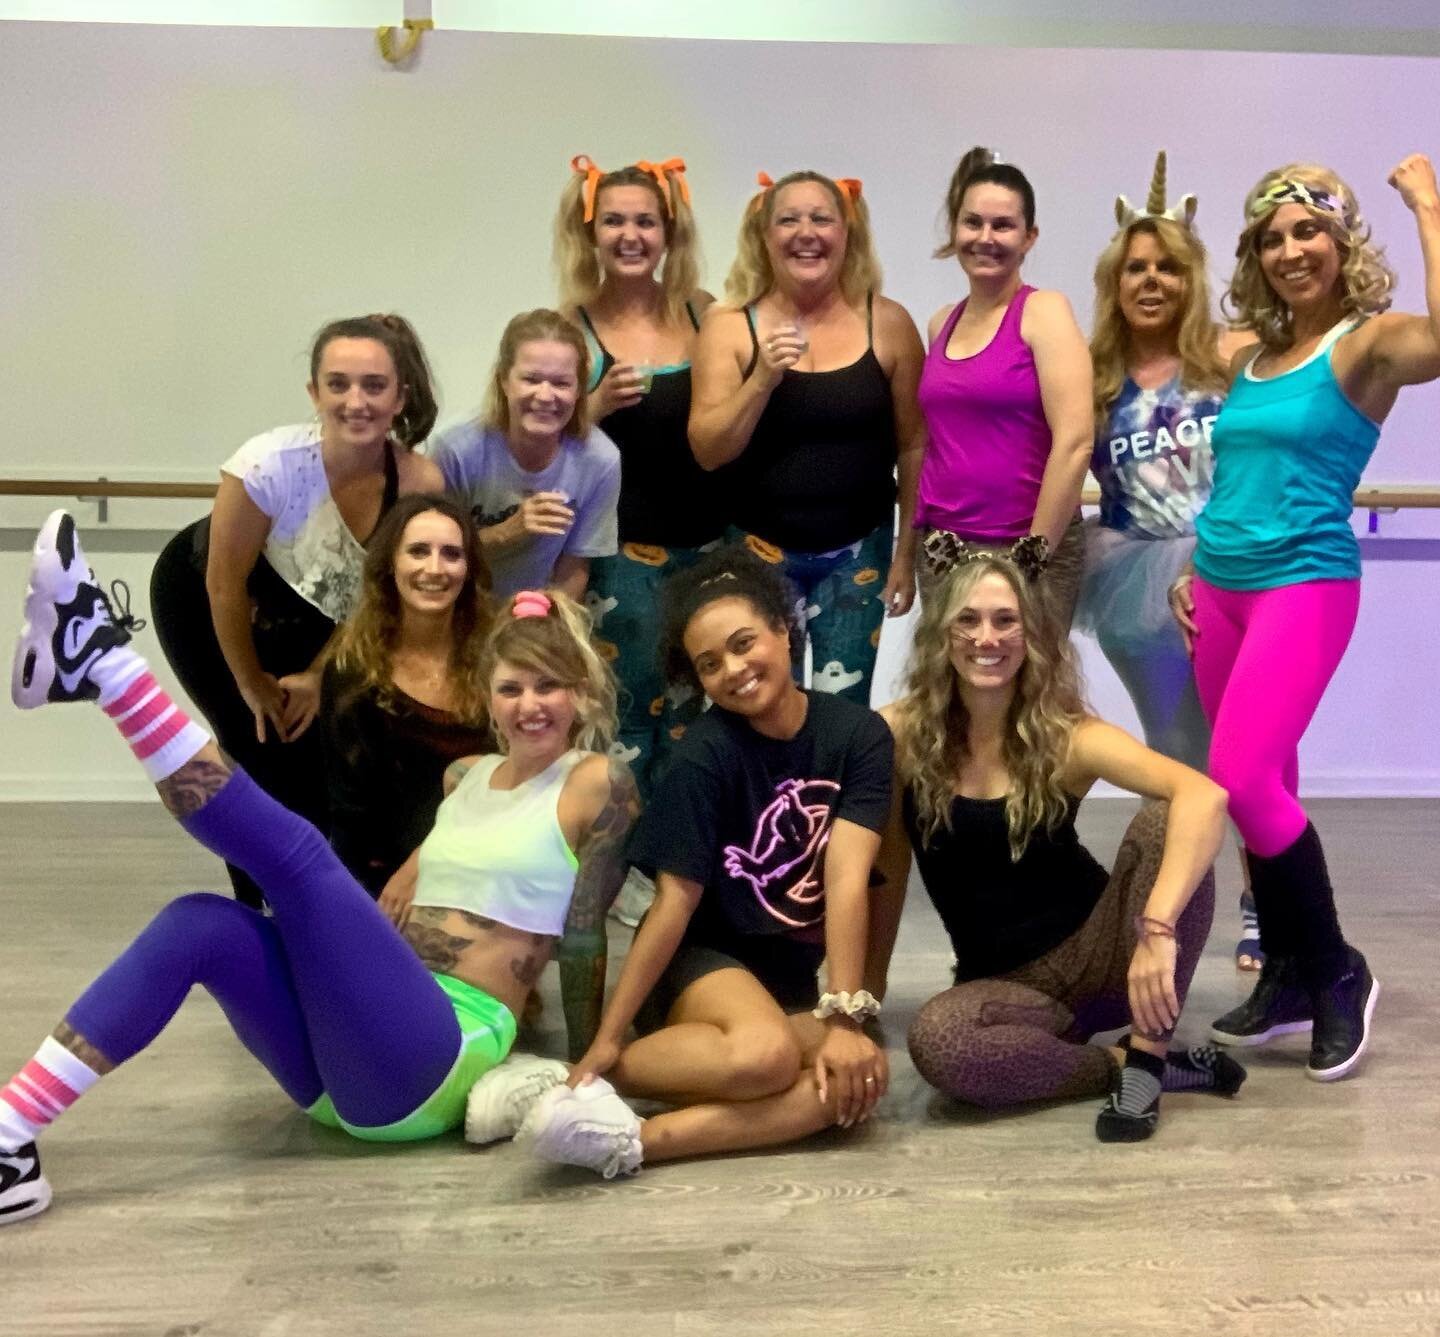 Happy Halloween and full moon in Taurus!🎃👻🧡

I had so much fun celebrating with this stellar group of women last night! We got to laugh and play together learning the dance moves to Michael Jackson&rsquo;s Thriller. 💃🏼🔥🤗 Growing with the commu